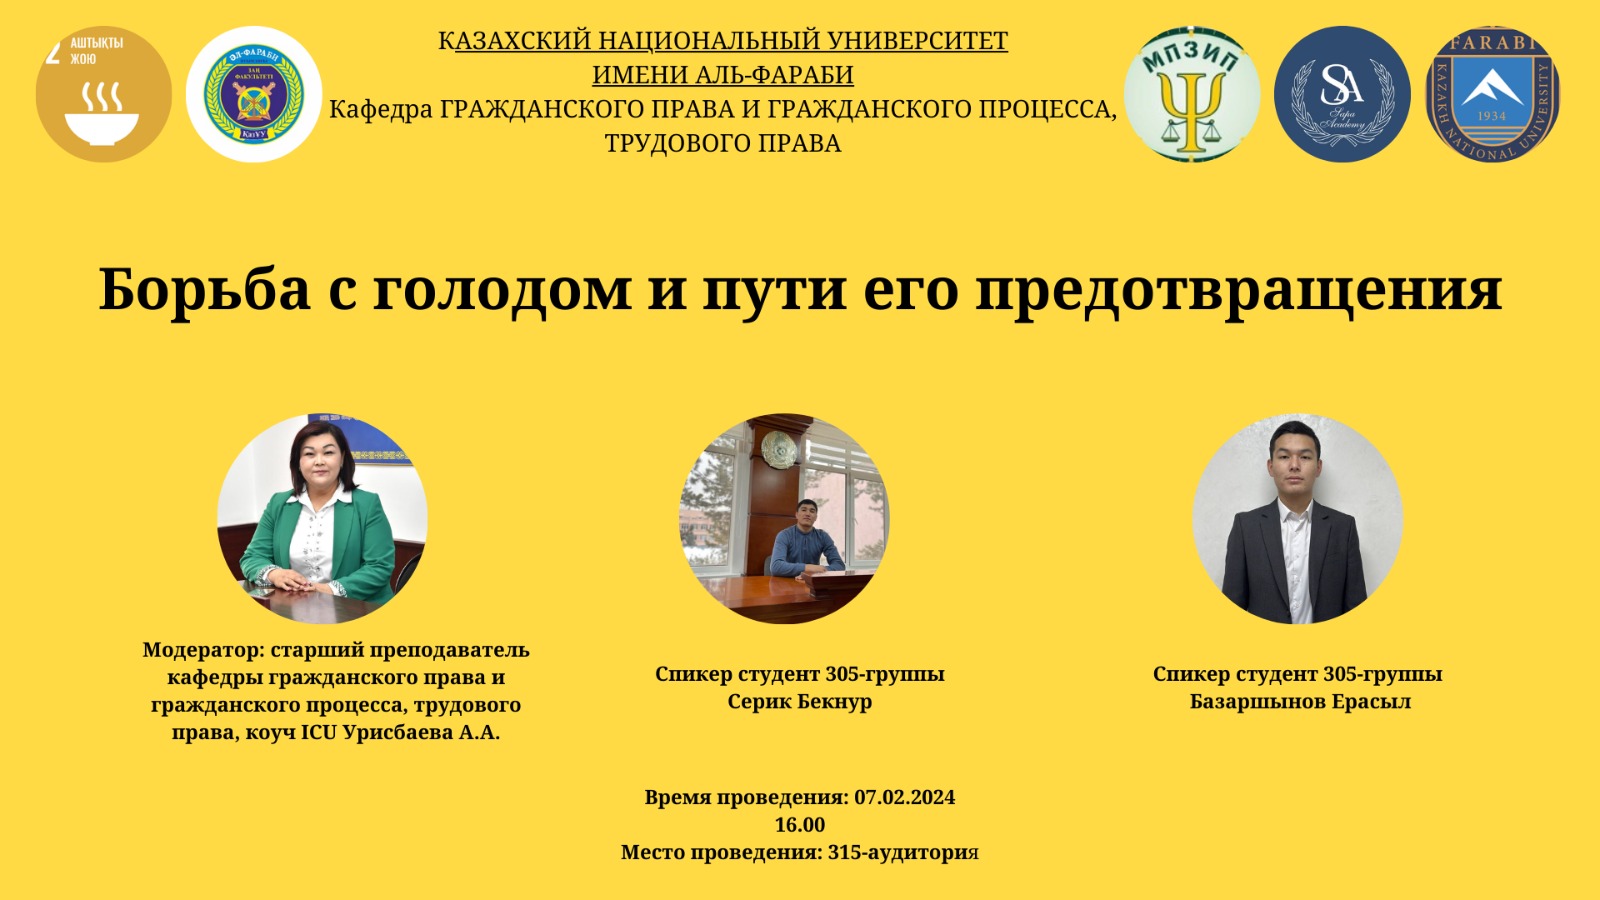 On February 7, 2024, the Department of Civil Law and Civil Procedure, Labor Law held a meeting on the topic "Fighting hunger and ways to prevent it", dedicated to the 90th anniversary of Al-Farabi Kazakh National University, within the framework of the program "Eliminating hunger" of the UN SDG No. 2.